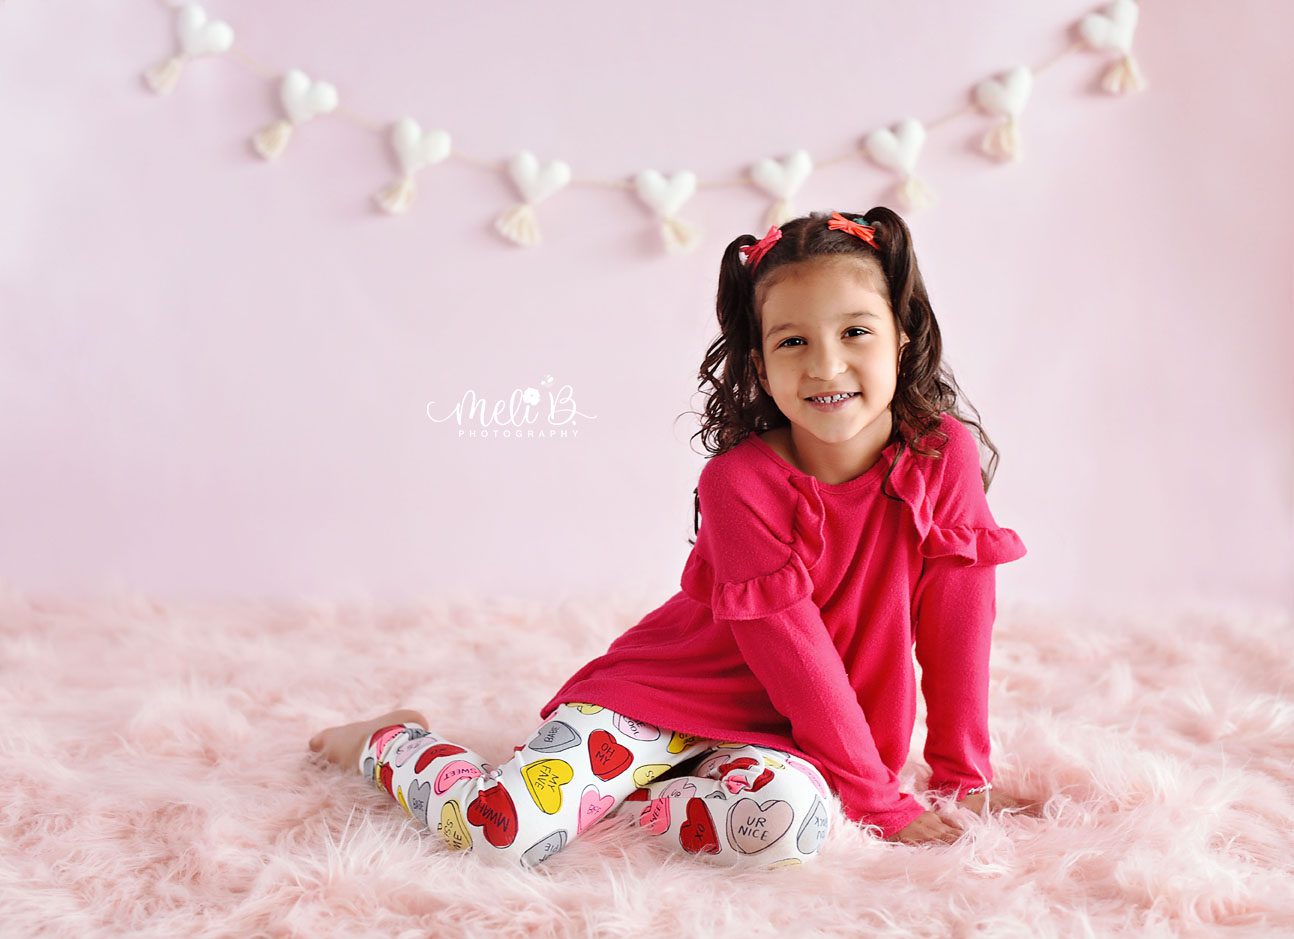 A child smiling during a photo session